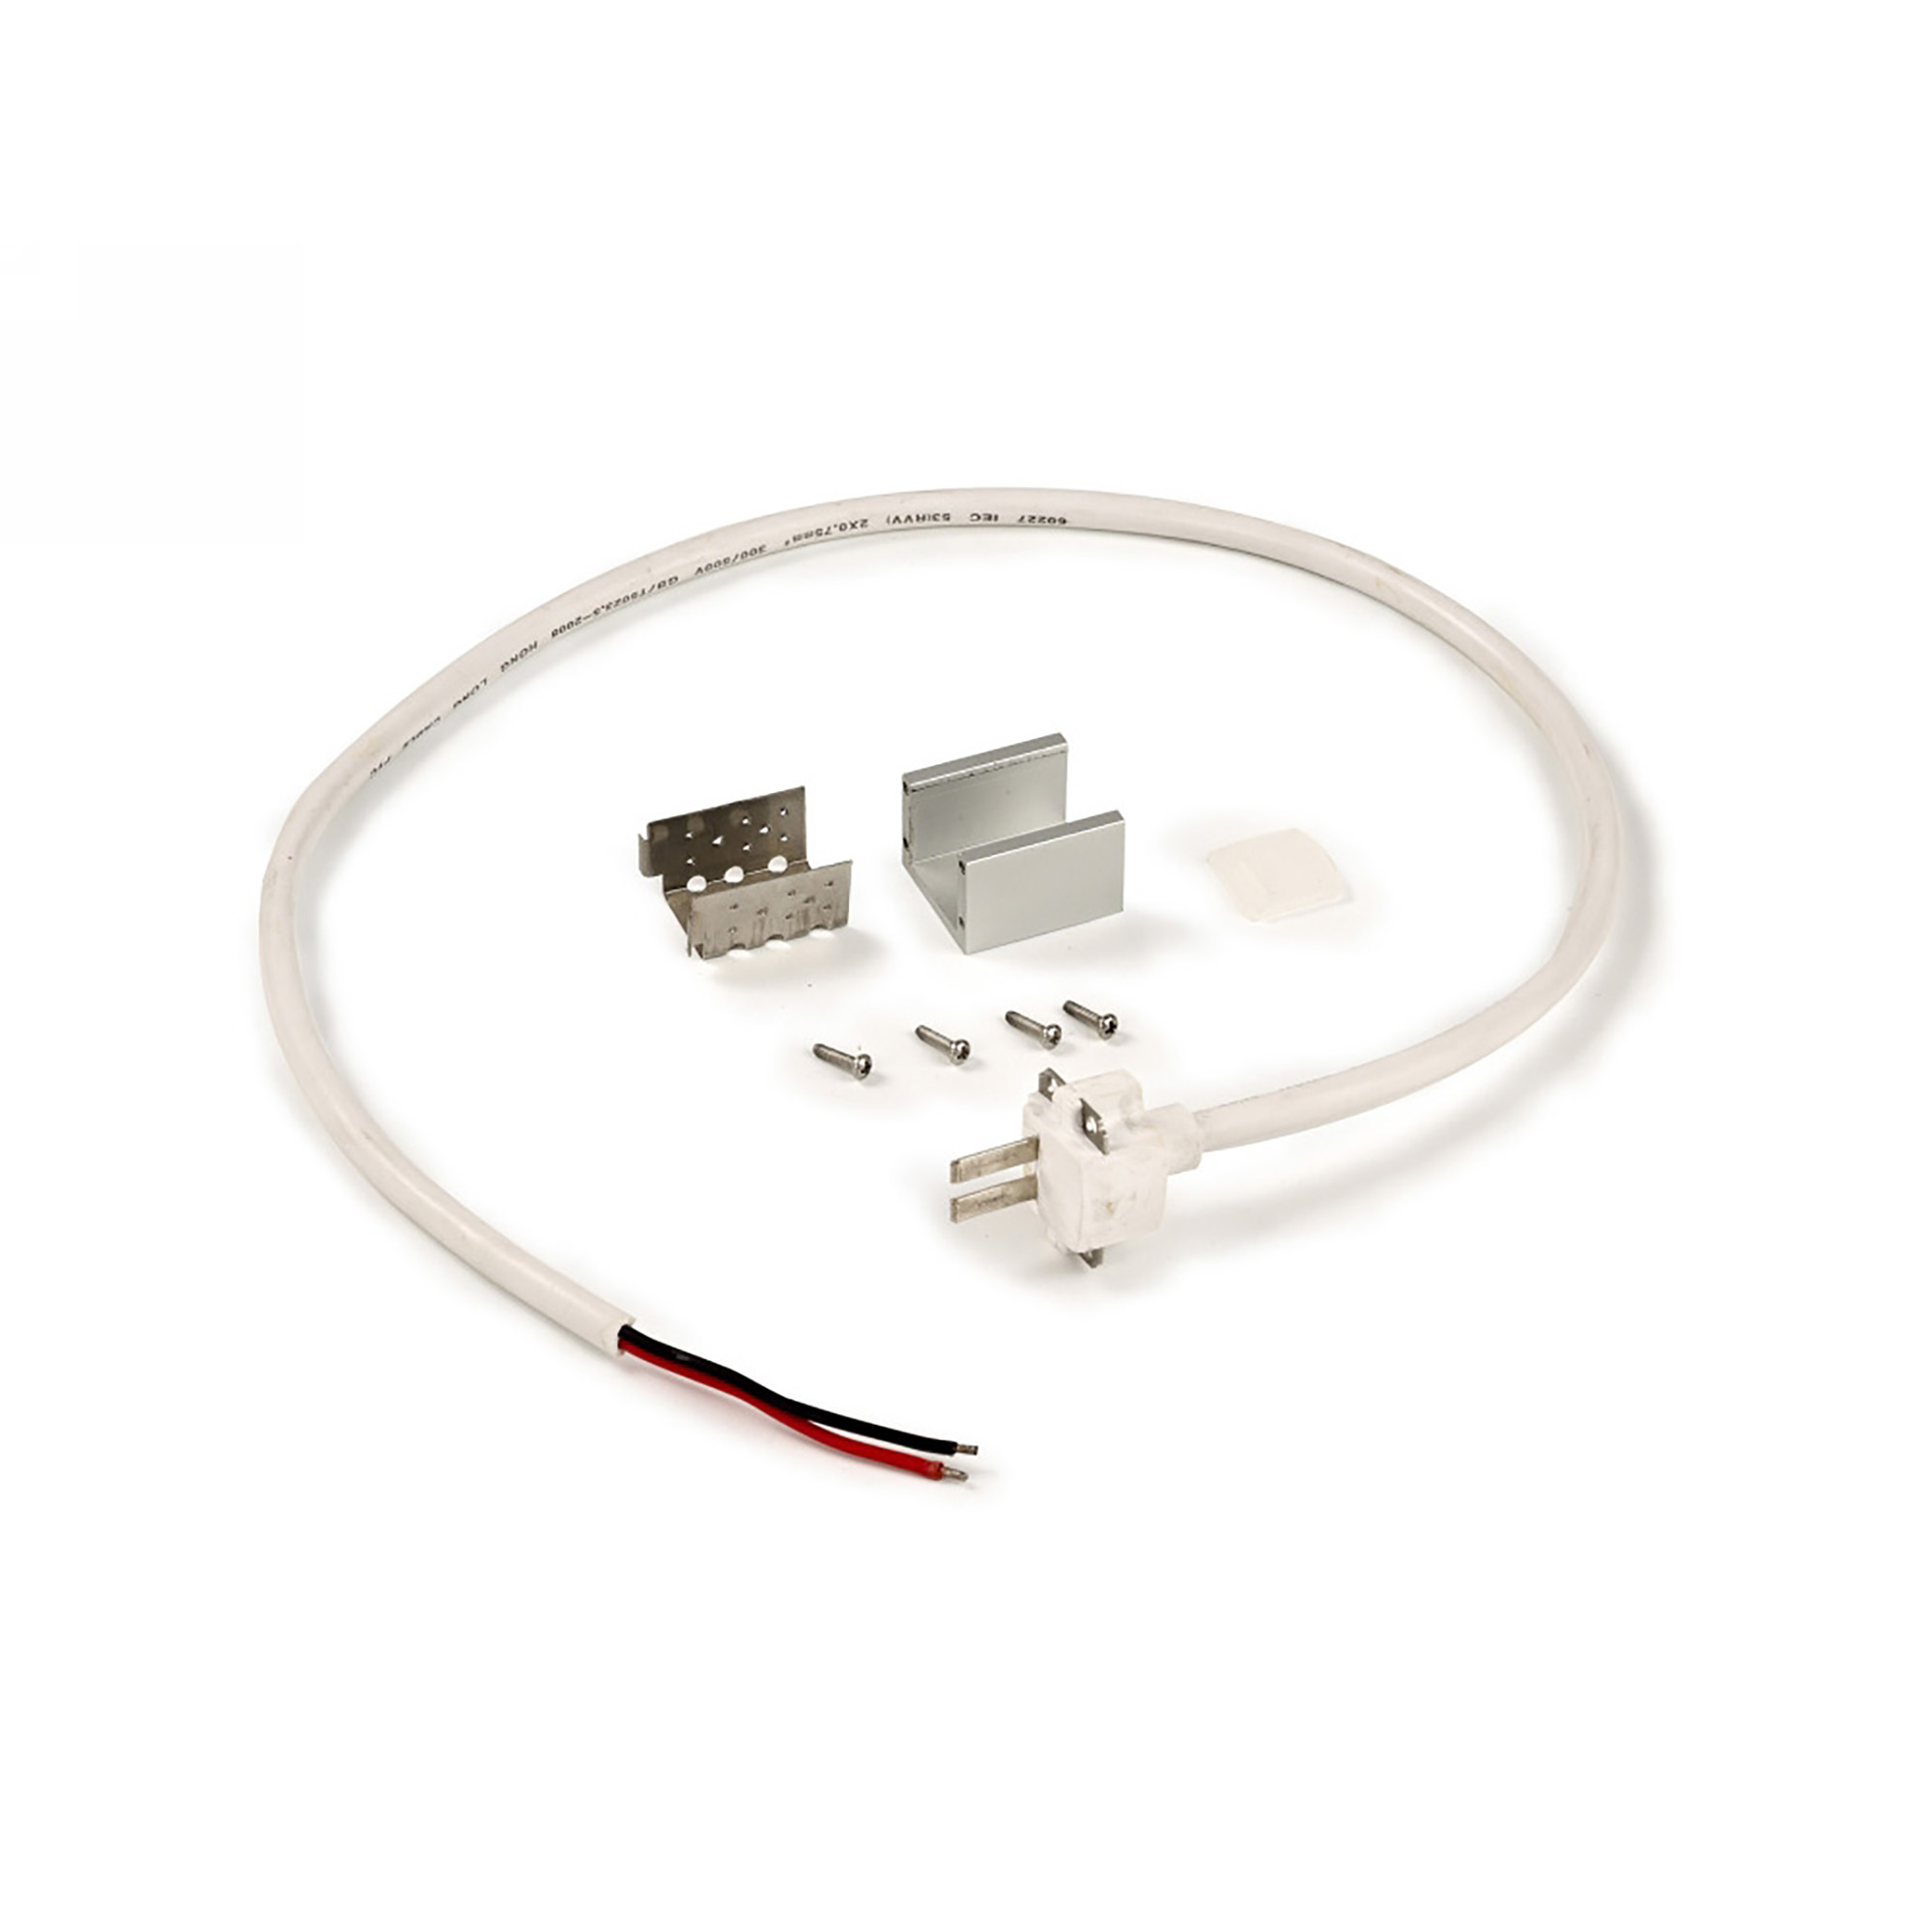 DX770038  Nexi 120TF/144TF; Front Left Side Connection Kit 0.6m Cable IP67/68